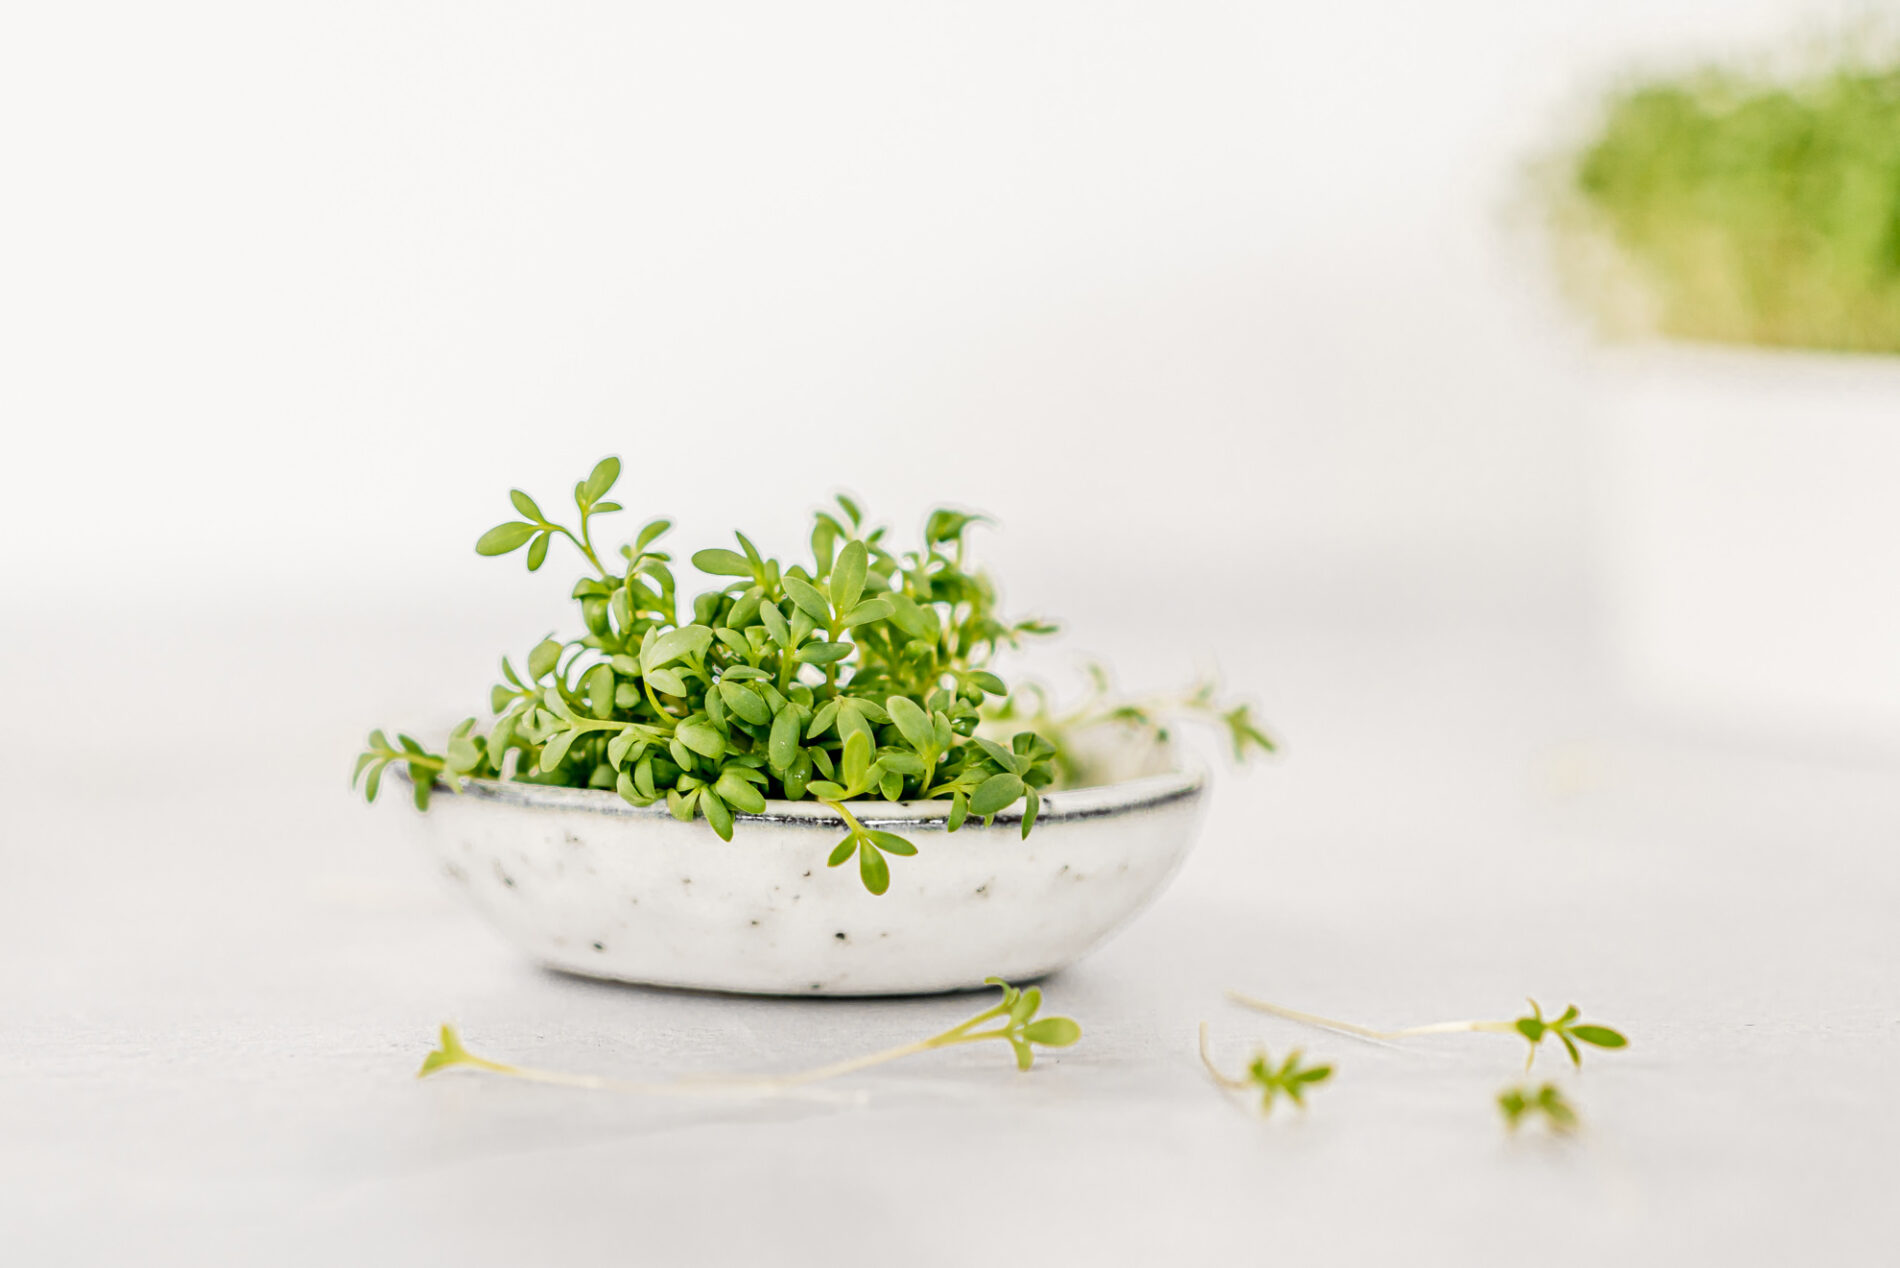 Close-up of cress in a small bowl